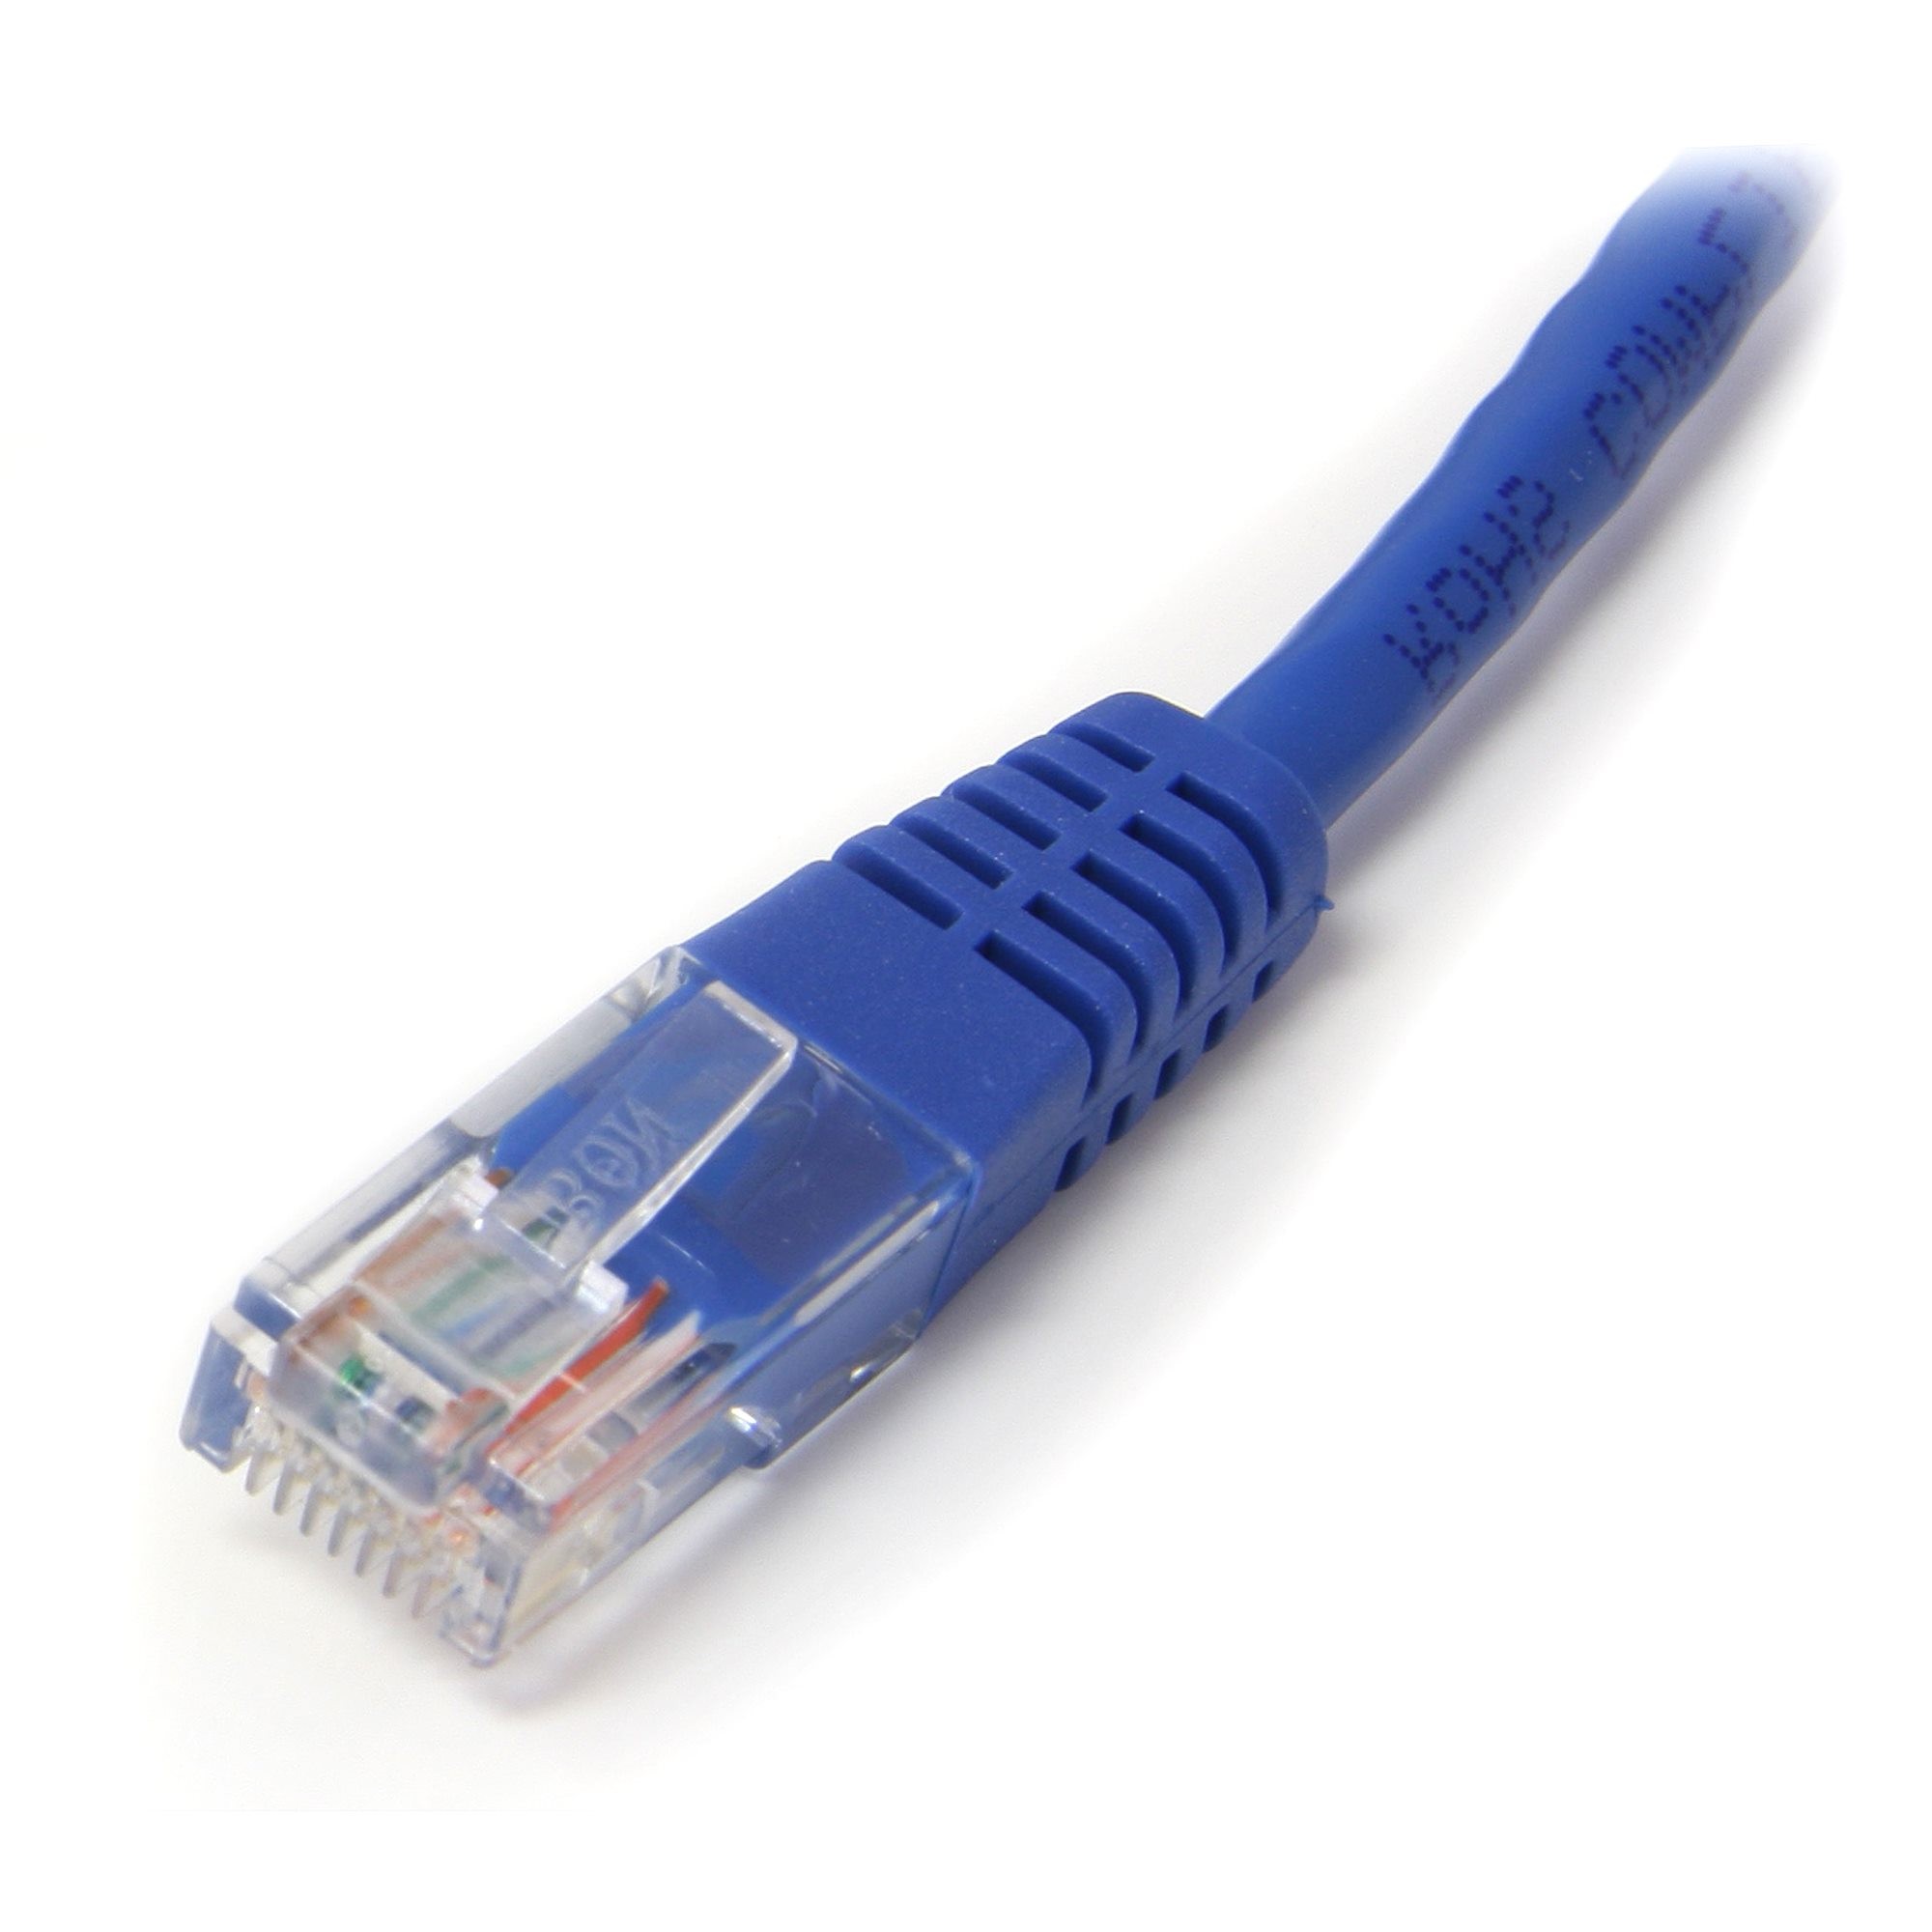 paniek Reis Voorlopige STCM45PATCH6BL - StarTech.com 6 ft Blue Molded Cat5e UTP Patch Cable - Make  Fast Ethernet network connections using this high quality Cat5e Cable, with  Power-over-Ethernet capability - 6ft Cat5e Patch Cable -